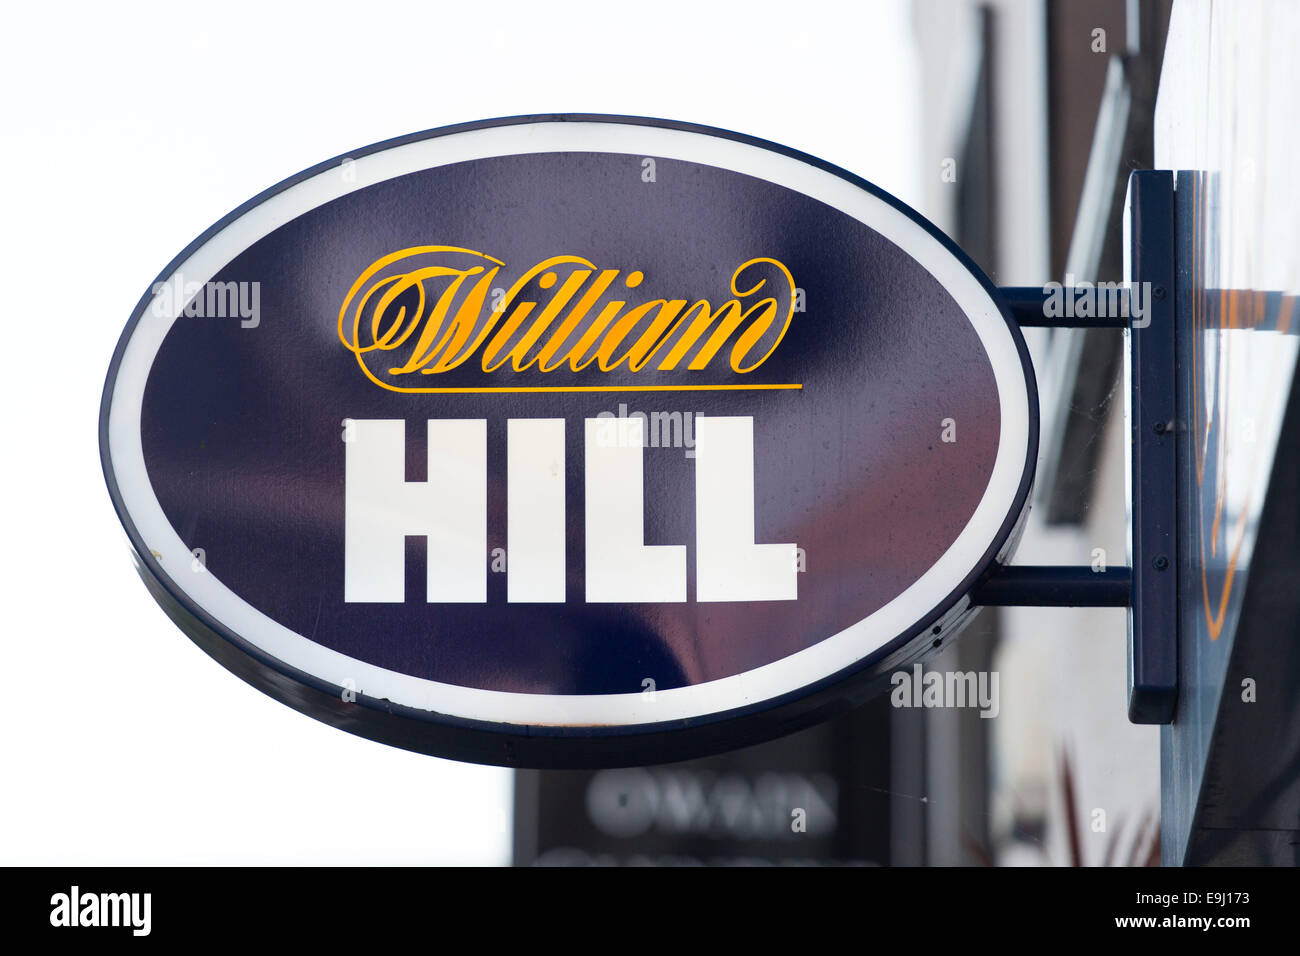 William Hill betting shop sign. Stock Photo